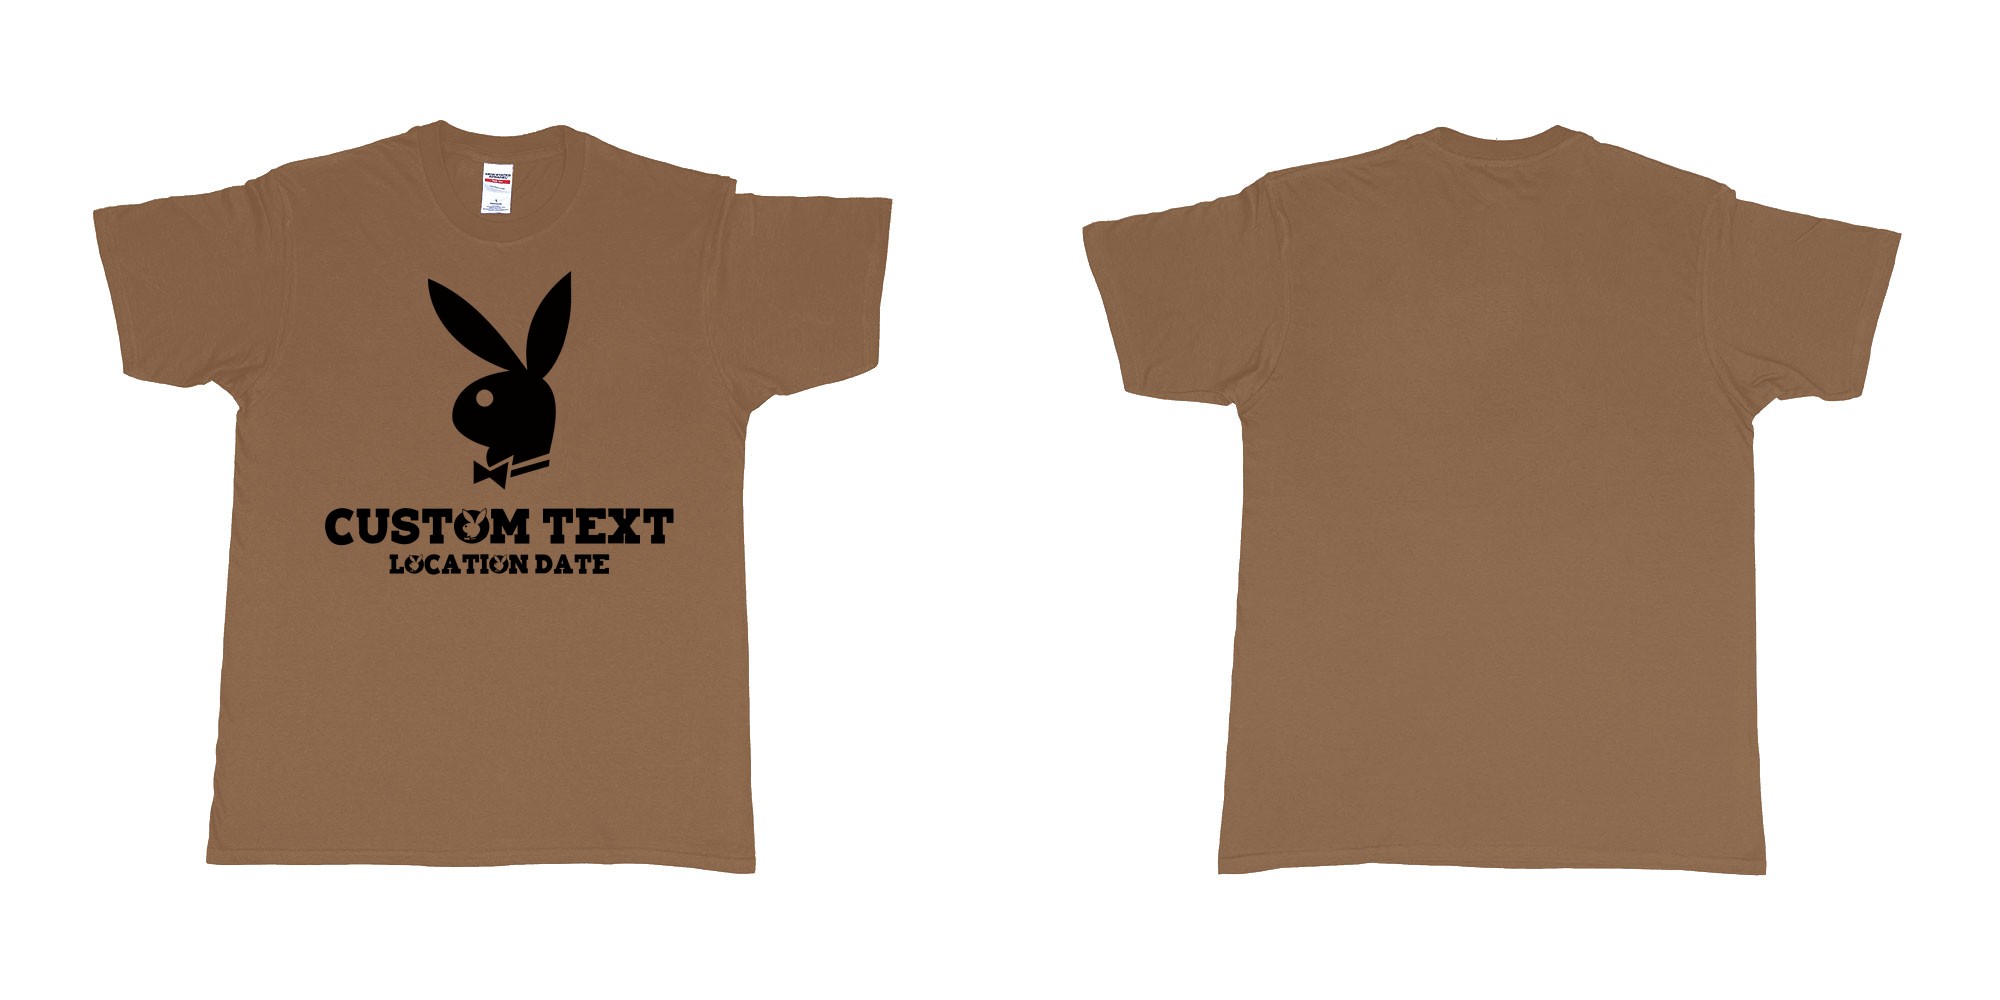 Custom tshirt design playboy playgirl custom text tshirt in fabric color chestnut choice your own text made in Bali by The Pirate Way